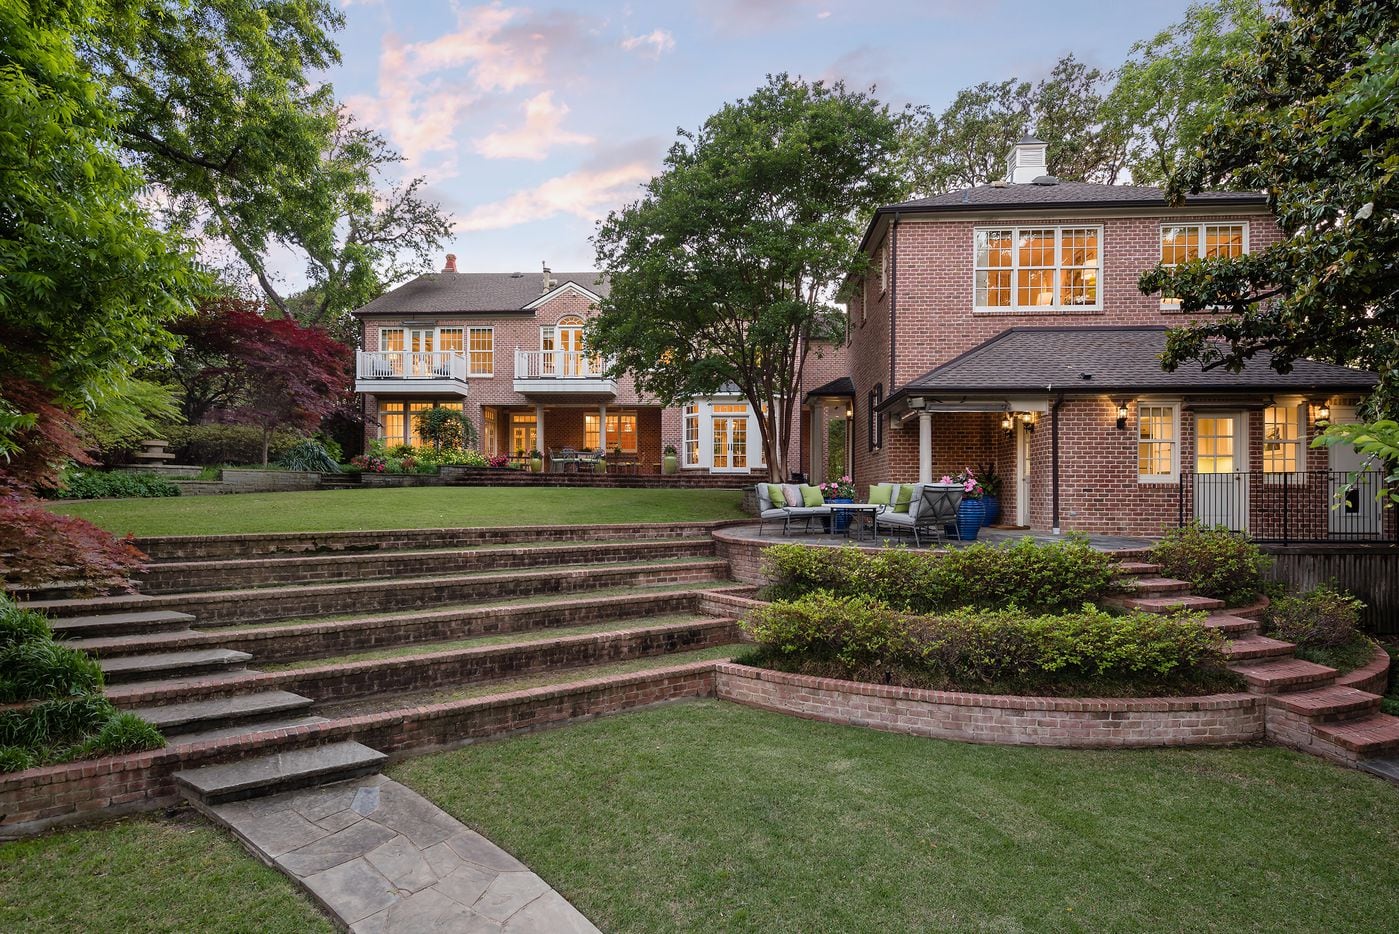 Take a look at the terraced landscaping in the backyard of the house at 9024 Broken Arrow Lane in Dallas.